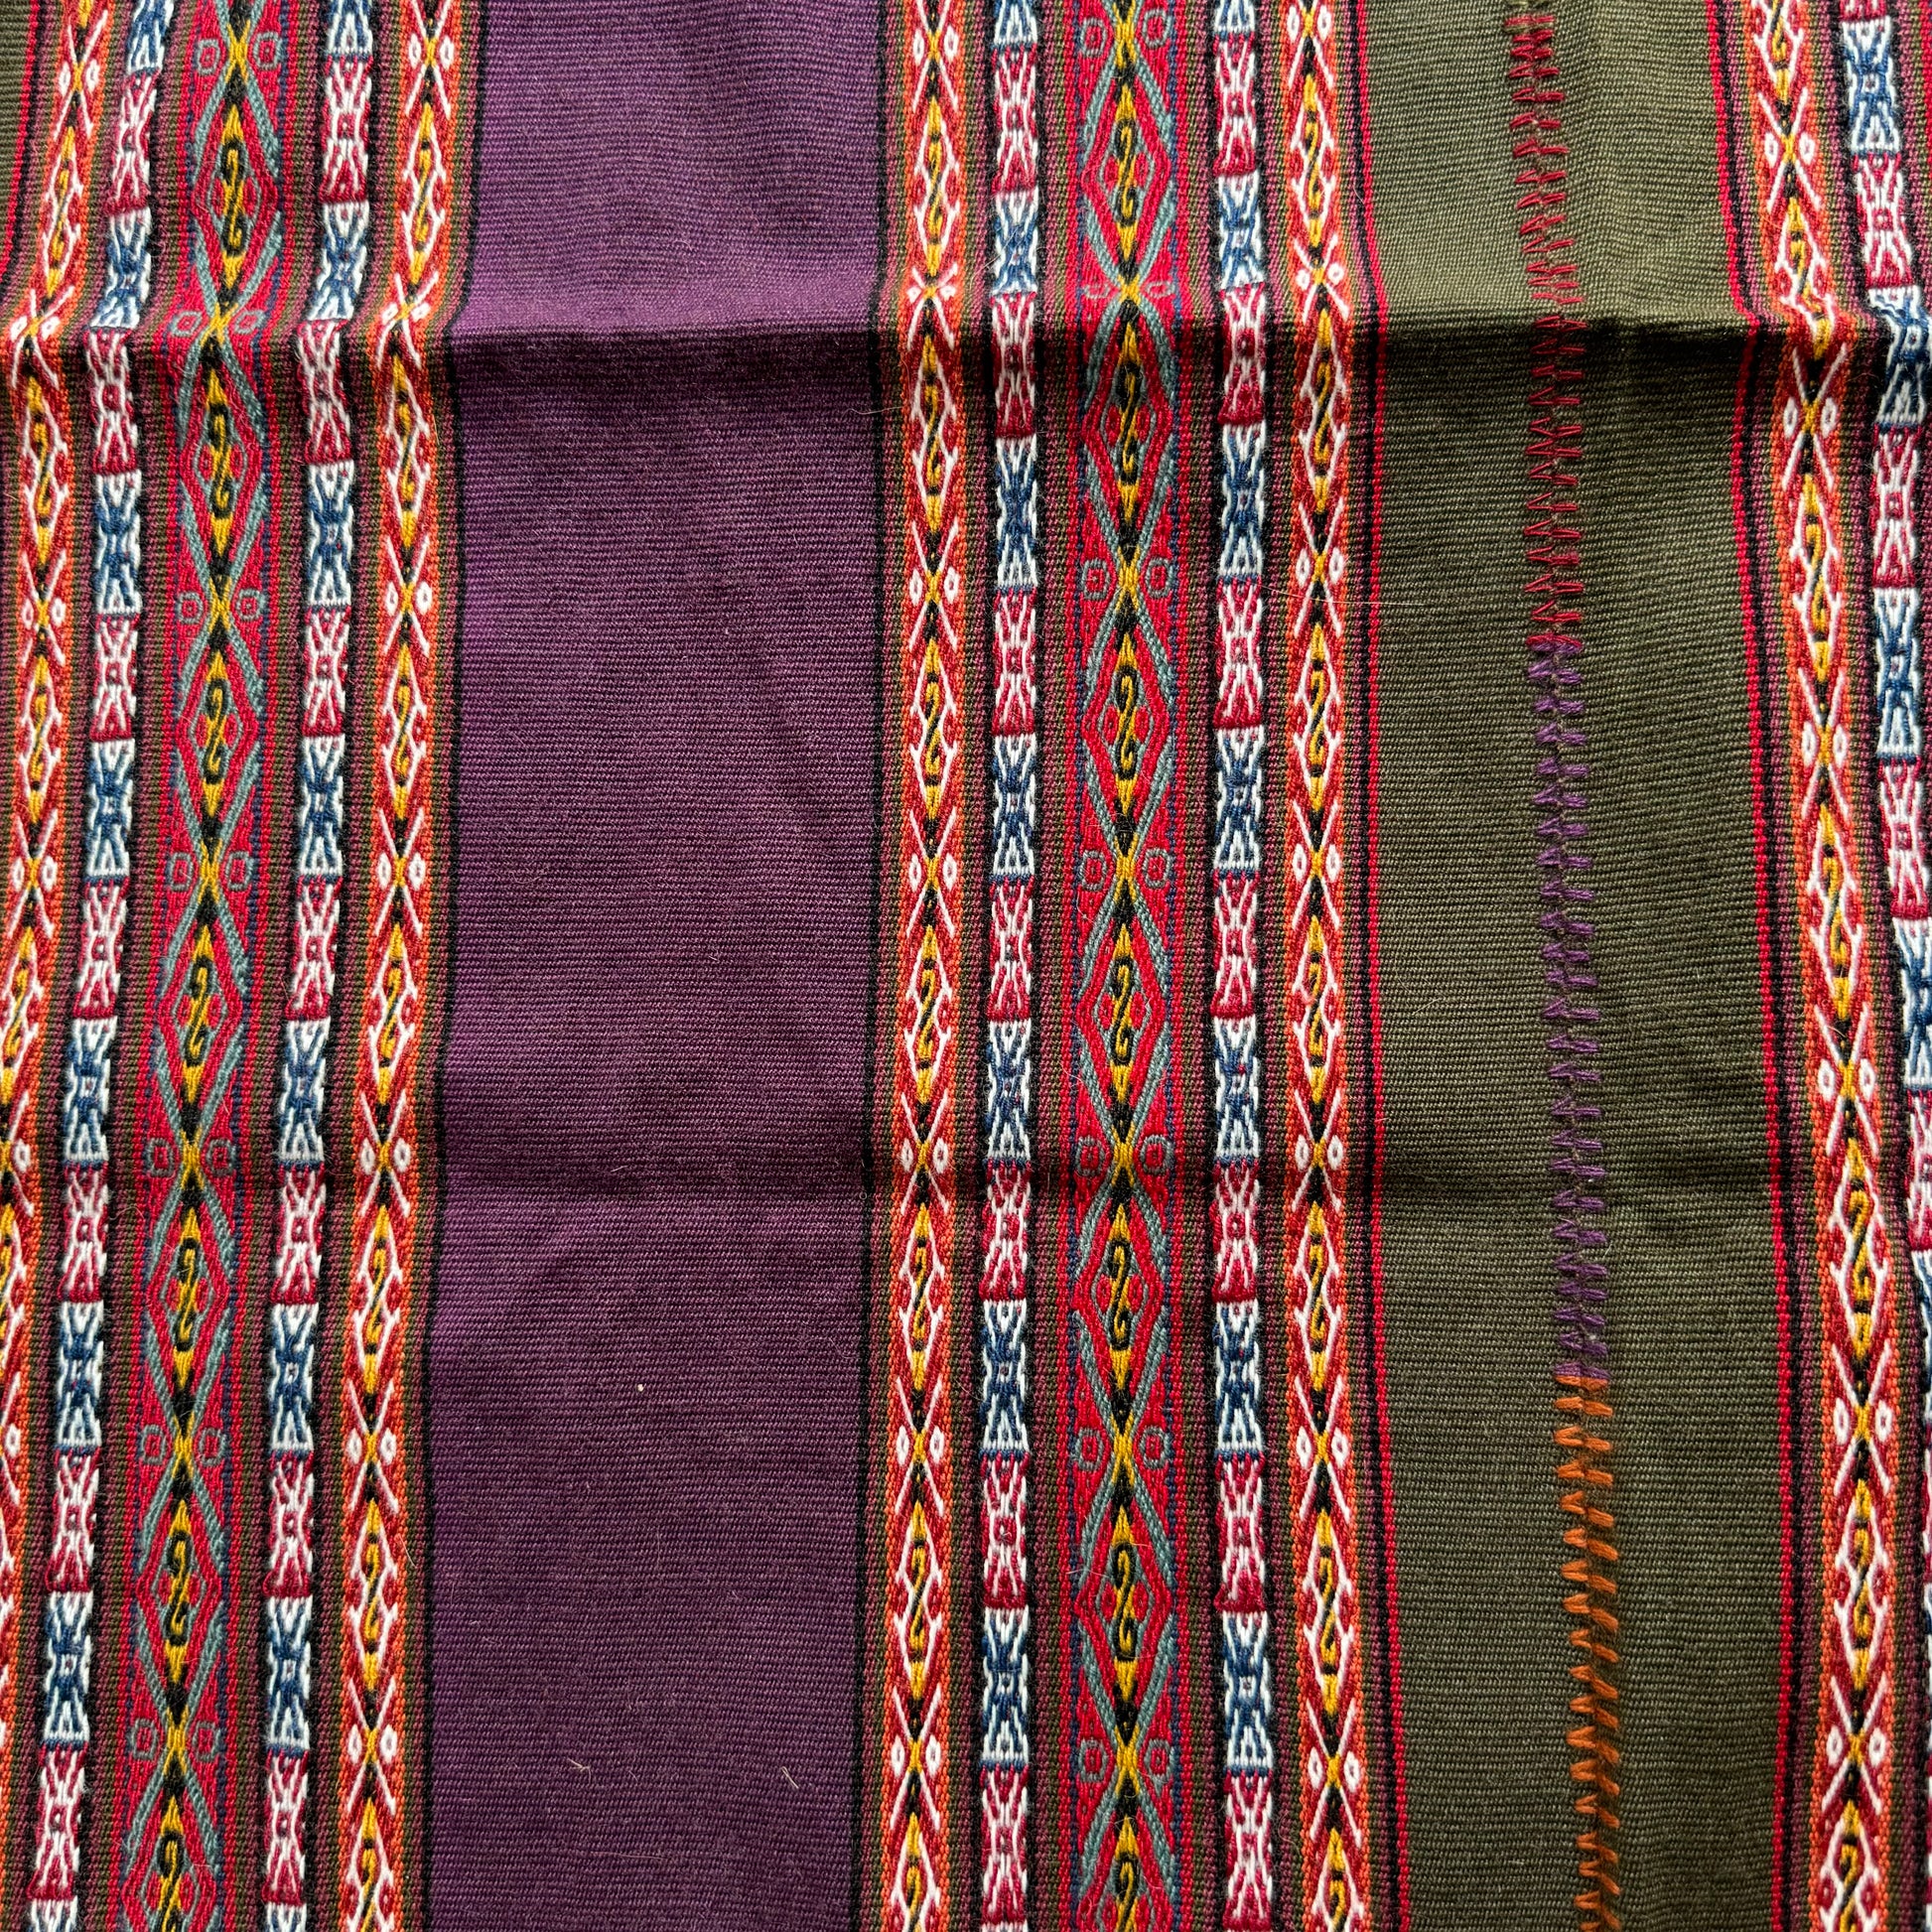 Sacred Mesa cloth folded in a bundle from the High Andes. Hand woven from hand dyed Alpaca wool in a variety of colors. Cloth can be used for your work with the Mesa, Sacred Medicine bundle, and/or as an Altar cloth.